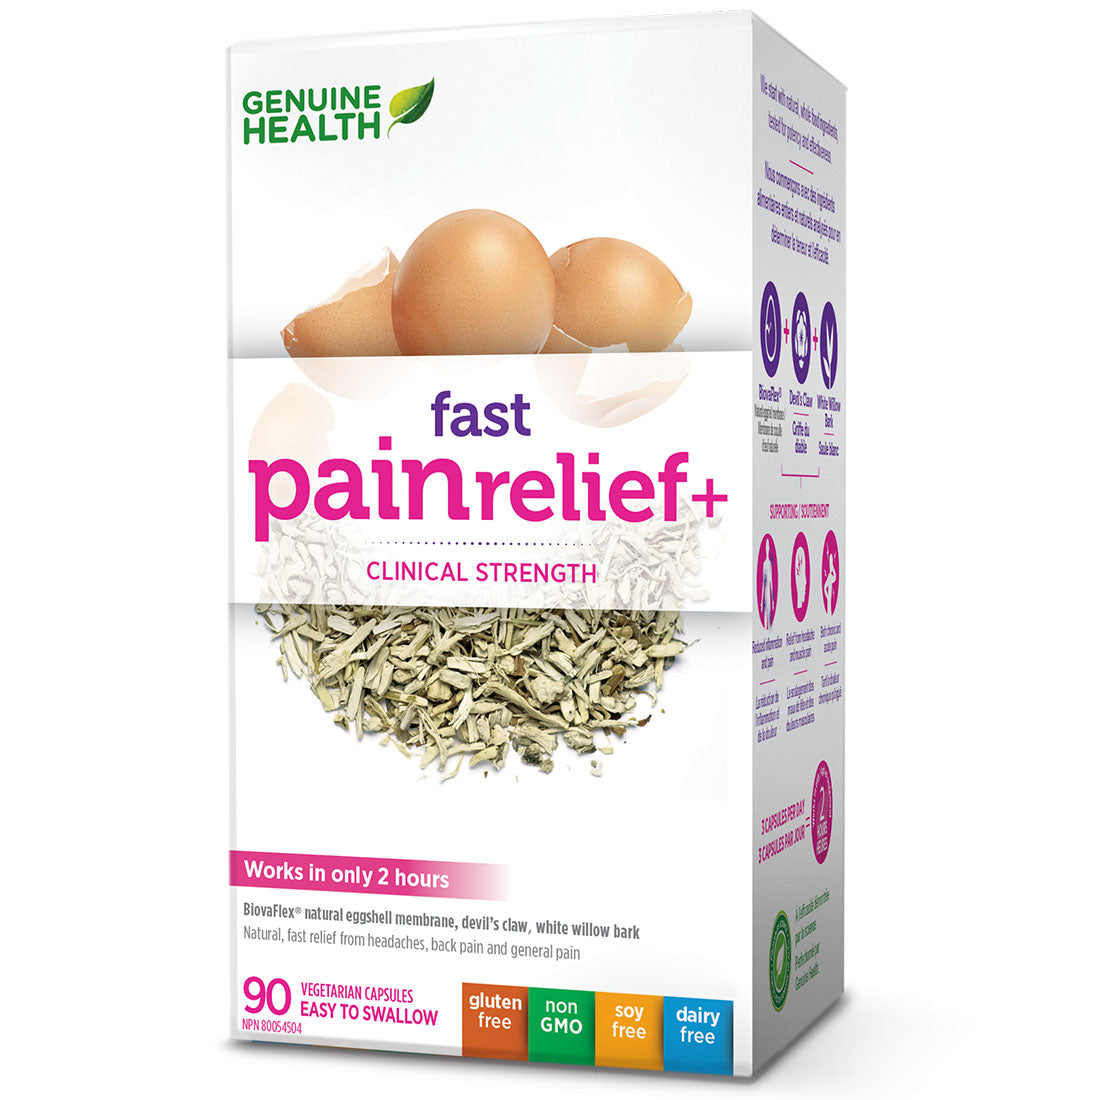 Genuine Health Fast Pain Relief+